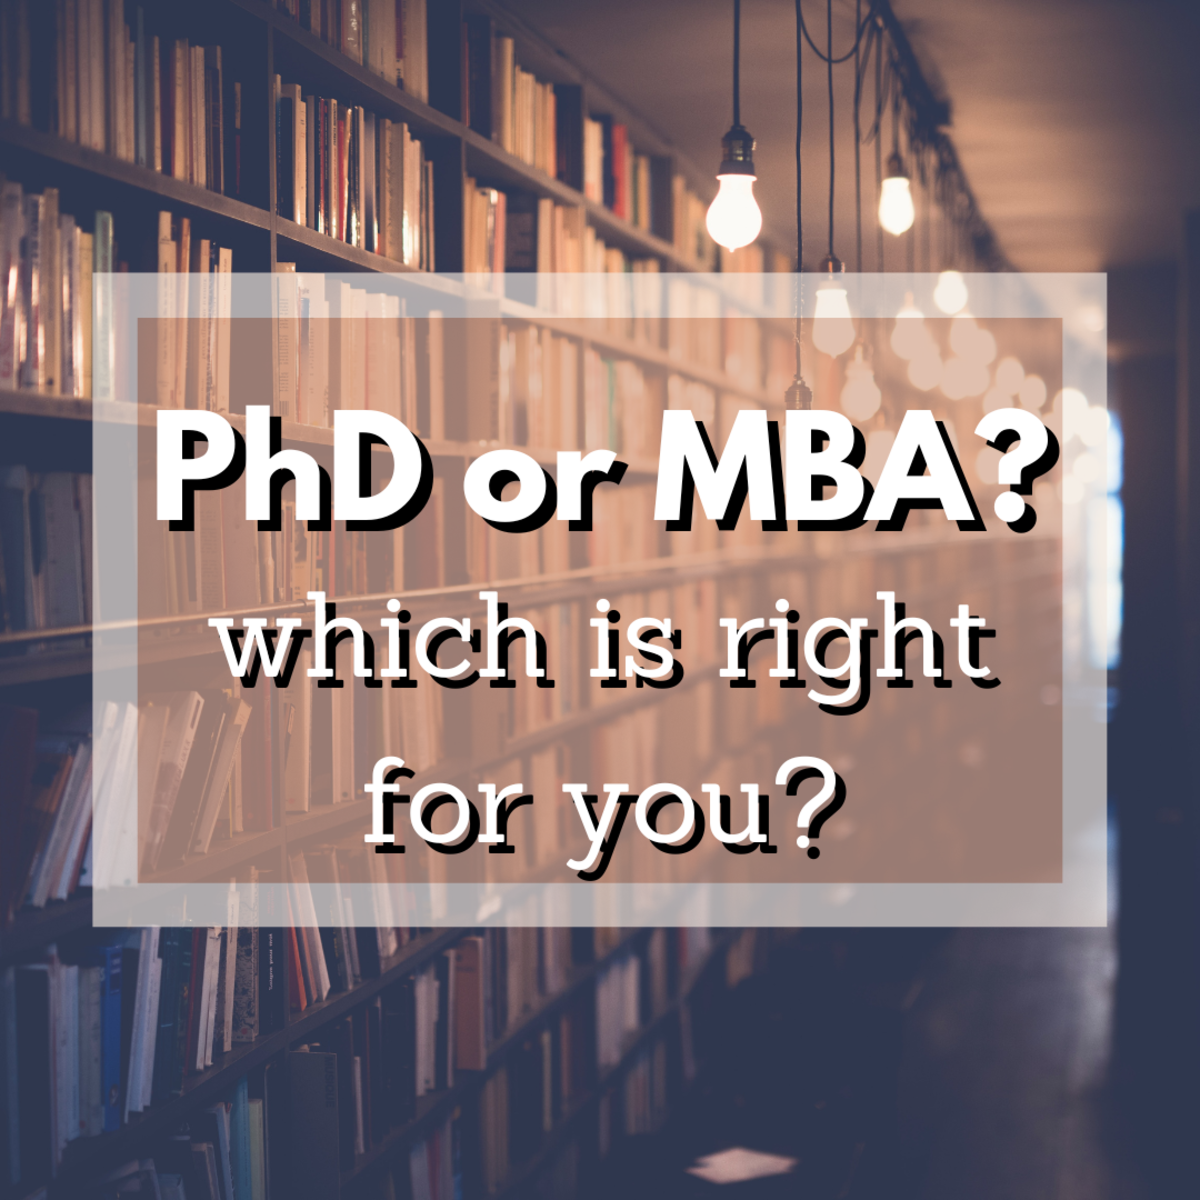 PhD or MBA? MBA or PhD? You may be weighing this decision continuously right now. Have no fear! This article offers some general advice about how to choose the correct graduate school degree and offers a plethora of helpful resources!